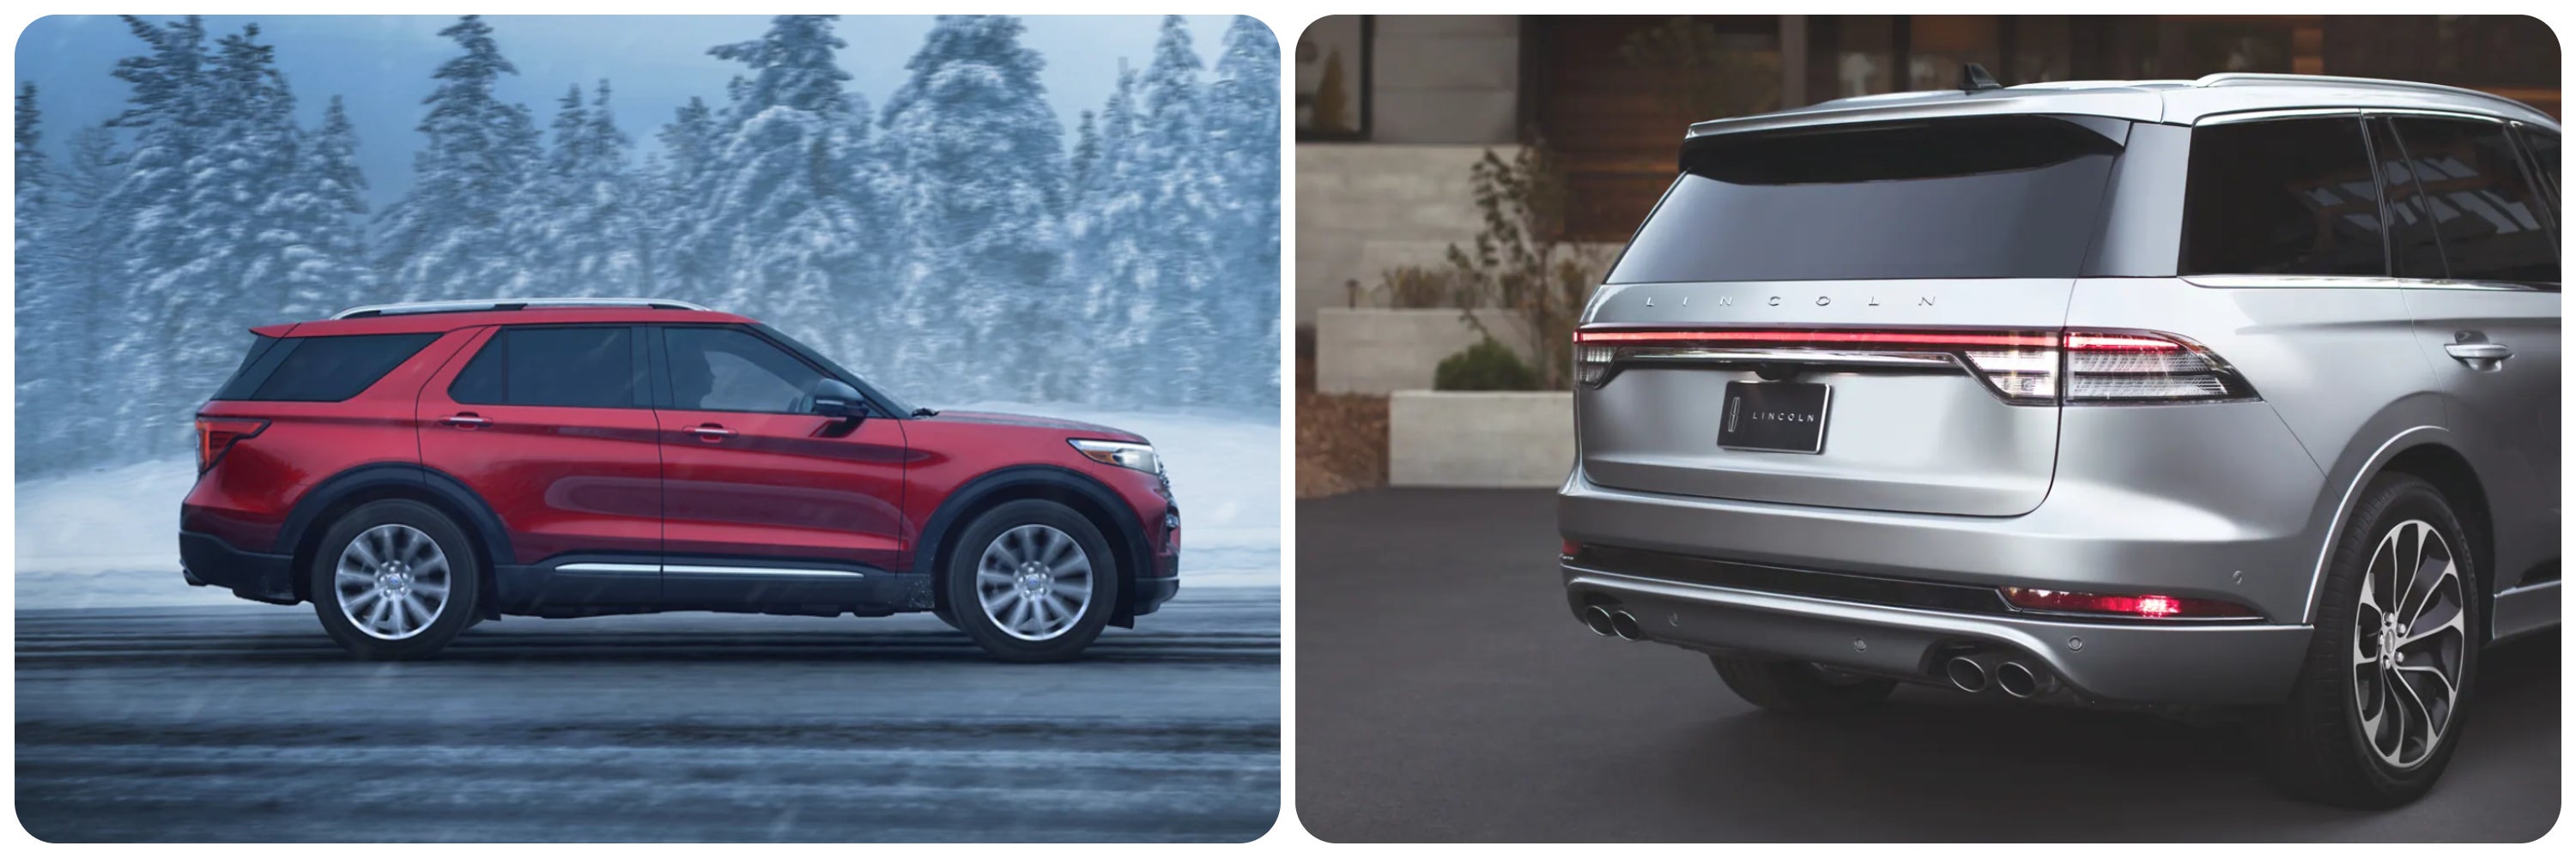 On the left a profile view of a red 2023 Ford Explorer on a snowy day, on the right a view of the back of a silver 2023 Lincoln Aviator